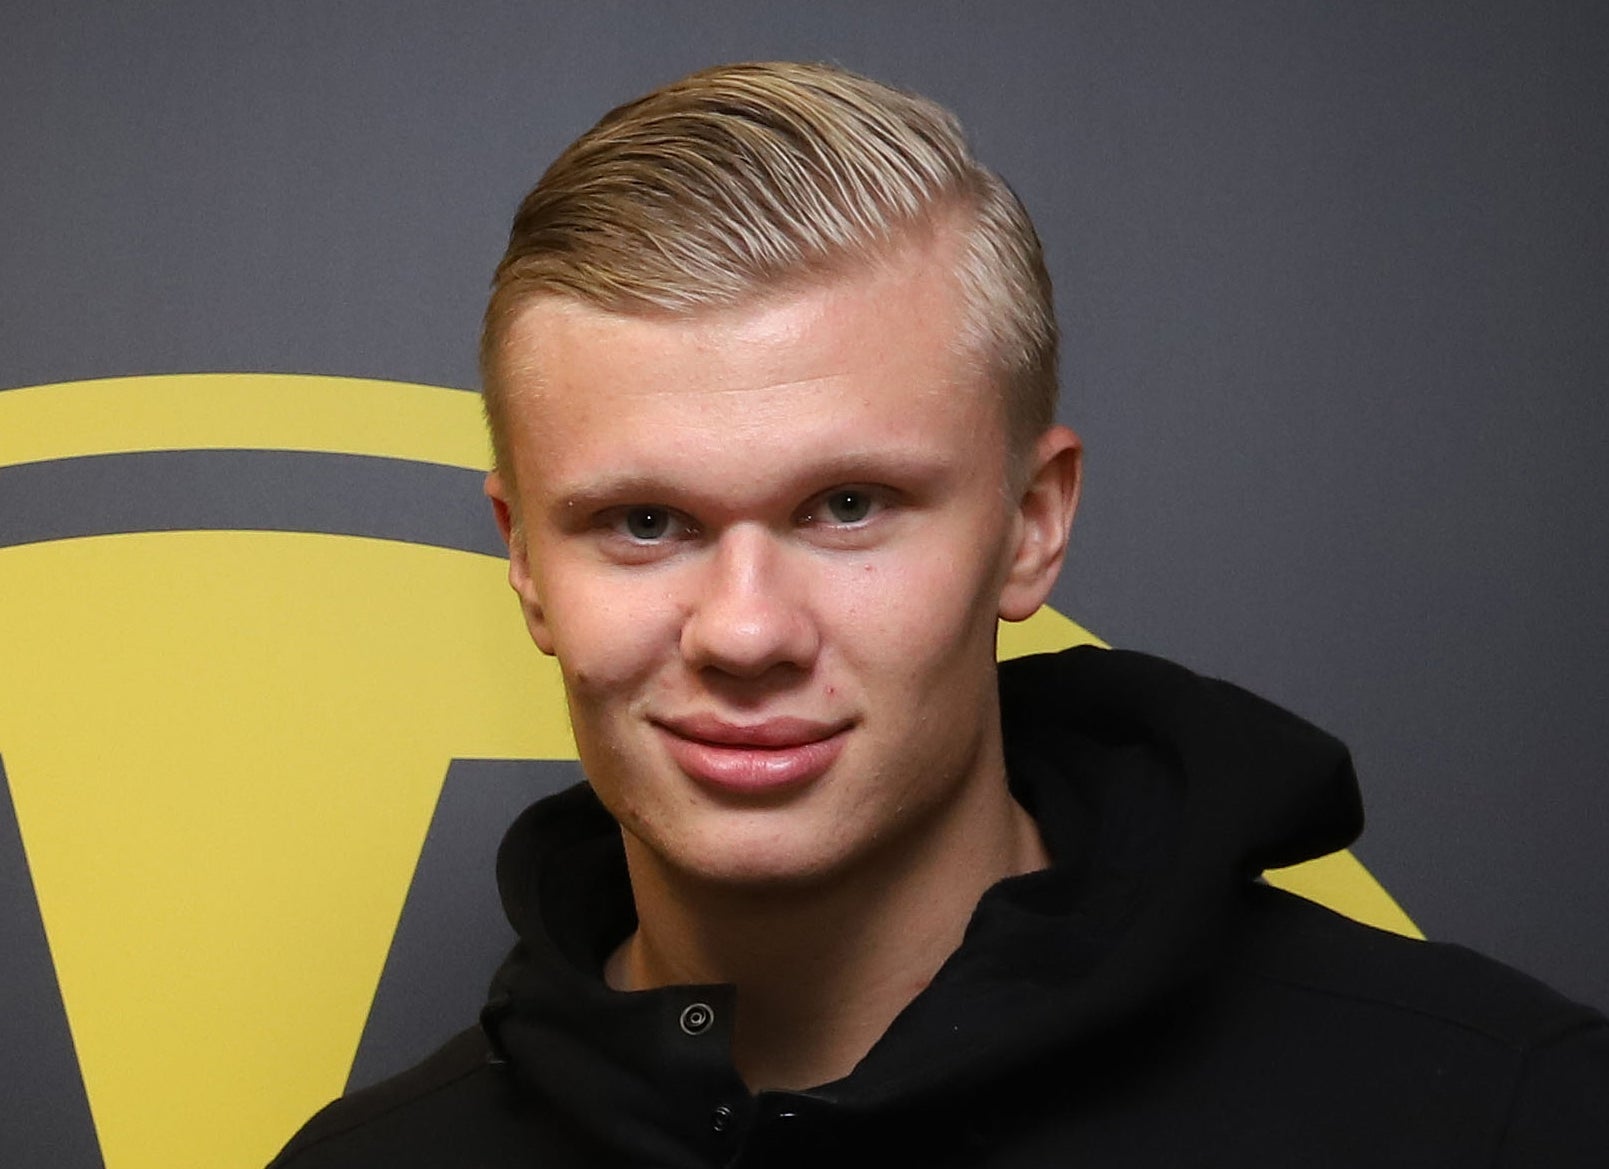 Erling Haaland moved to Dortmund with several clubs chasing his signature